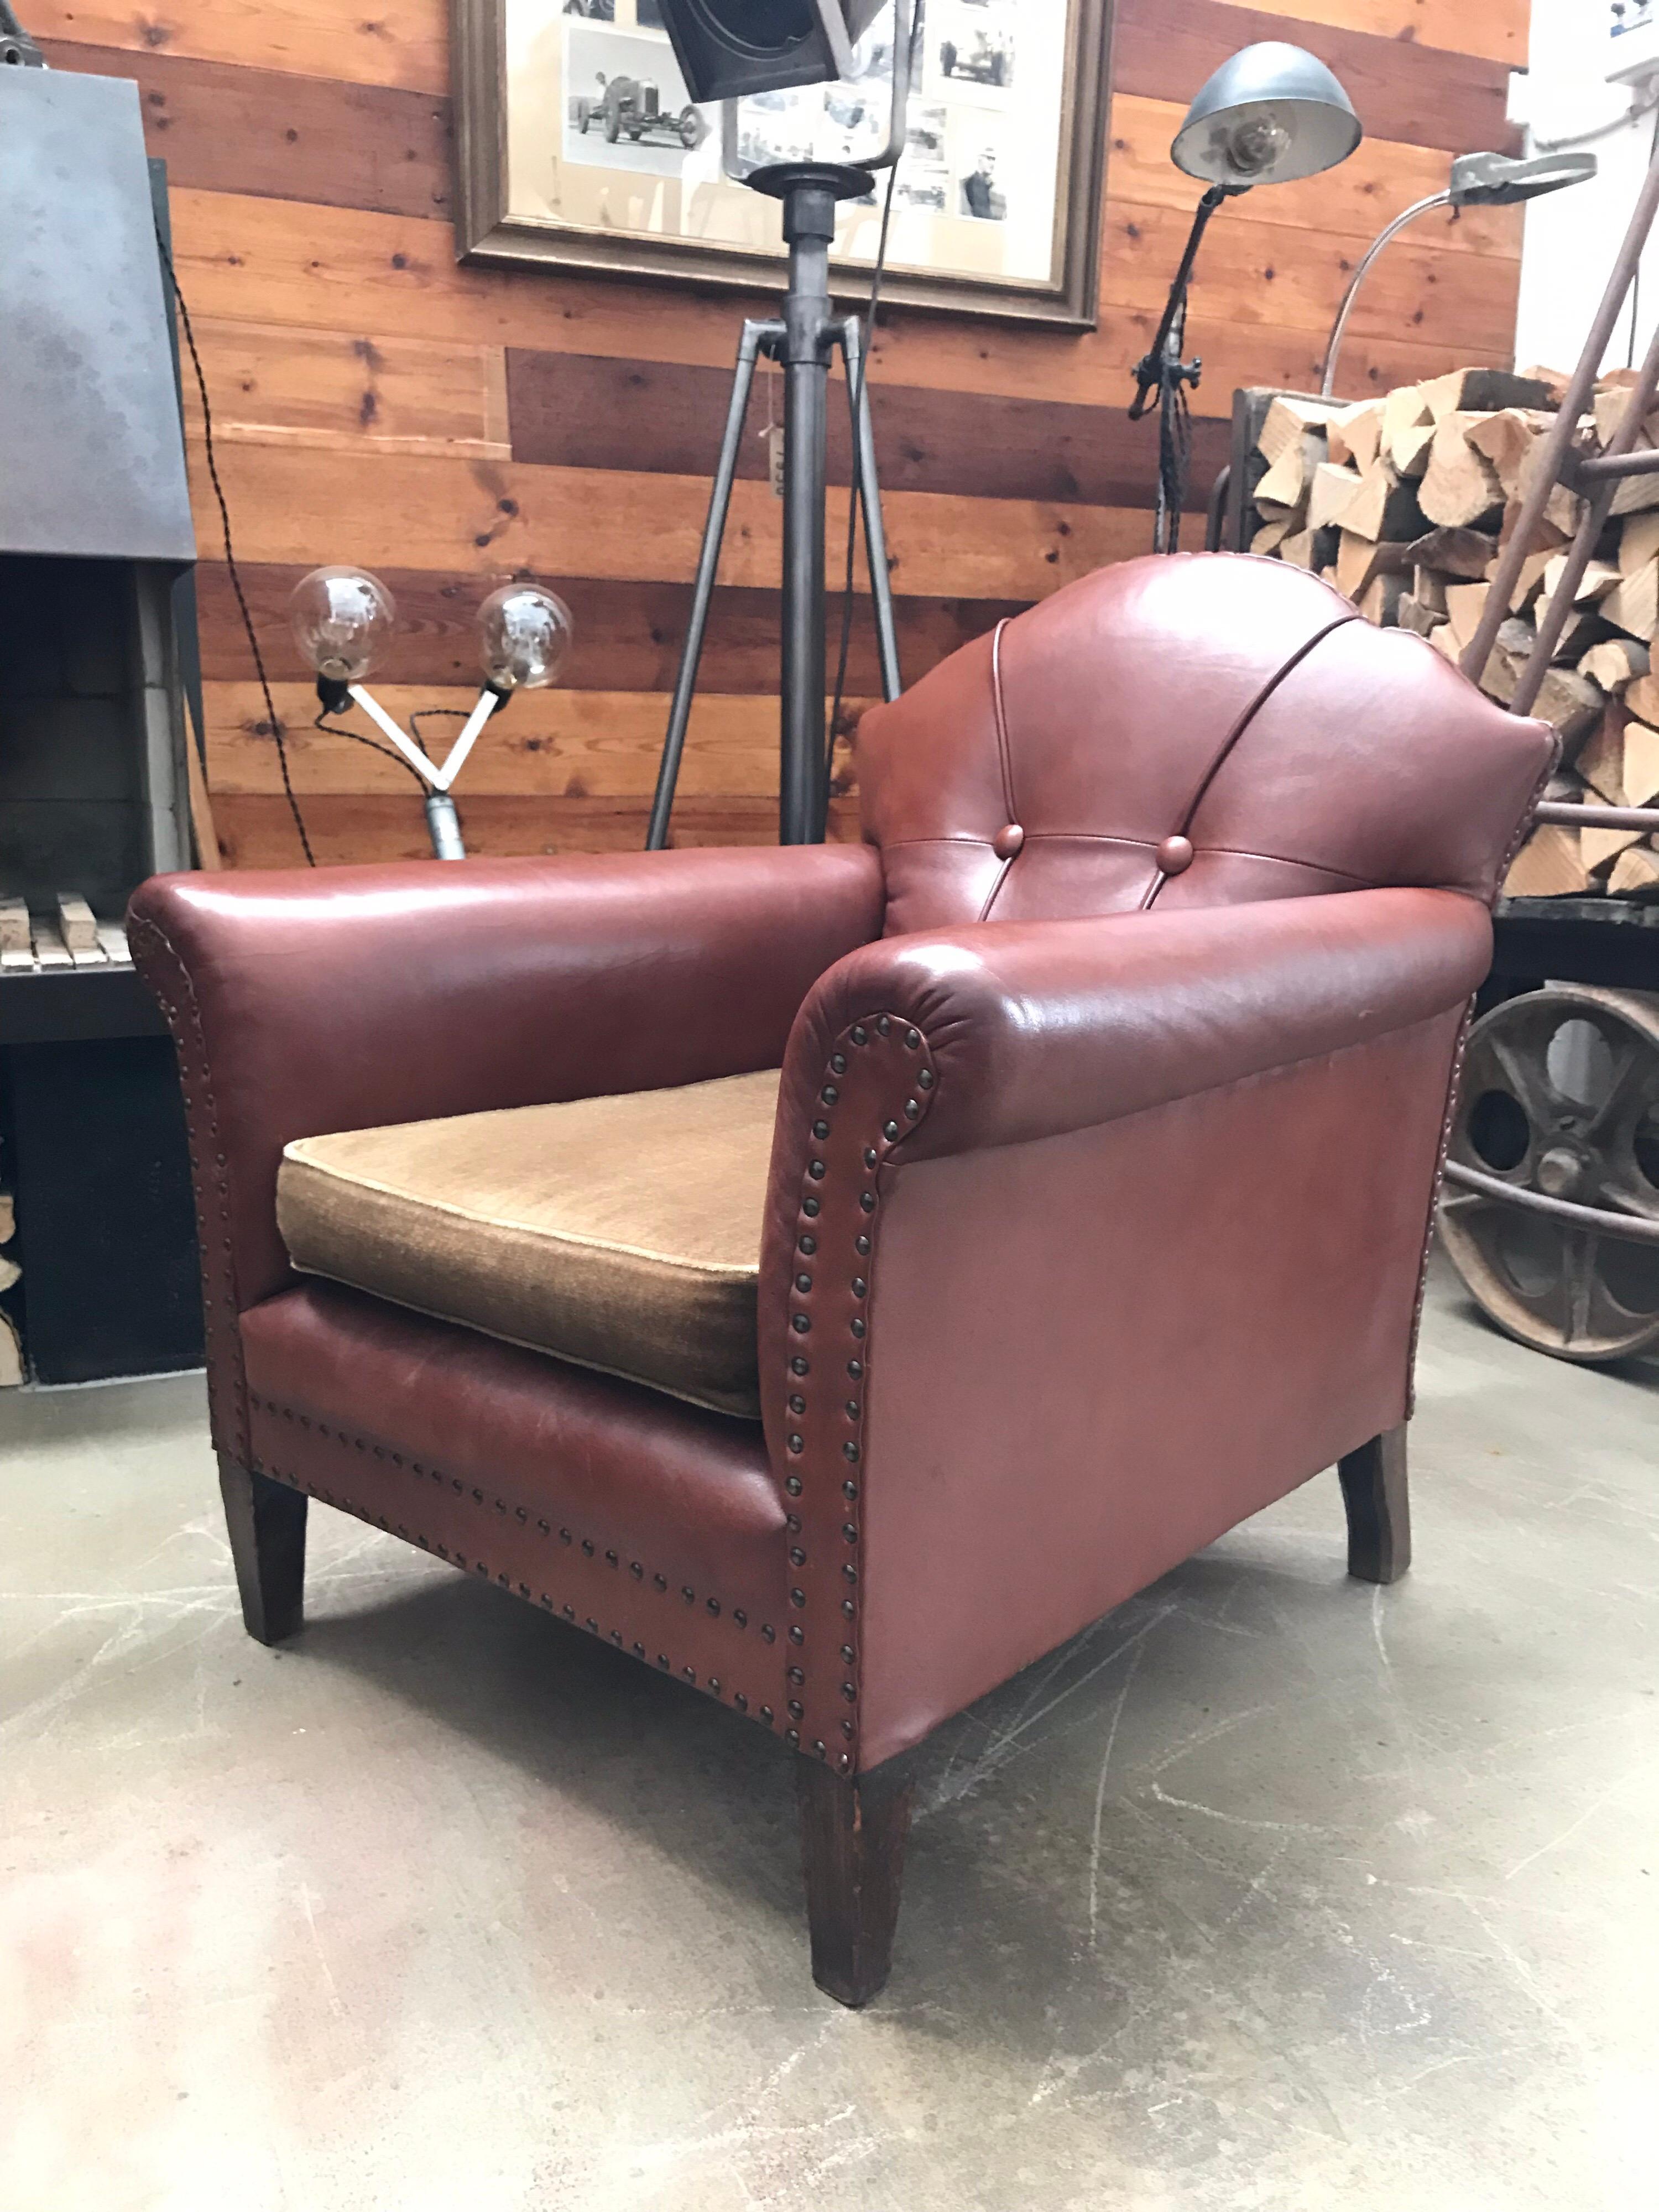 Vintage club lounge chair in brass studded leather from the 1950s
Oak frame with oak legs
In great vintage condition with a lovely patina to the leather
One small burn mark to the leather and velvet covered cushion that isn’t noticeable.